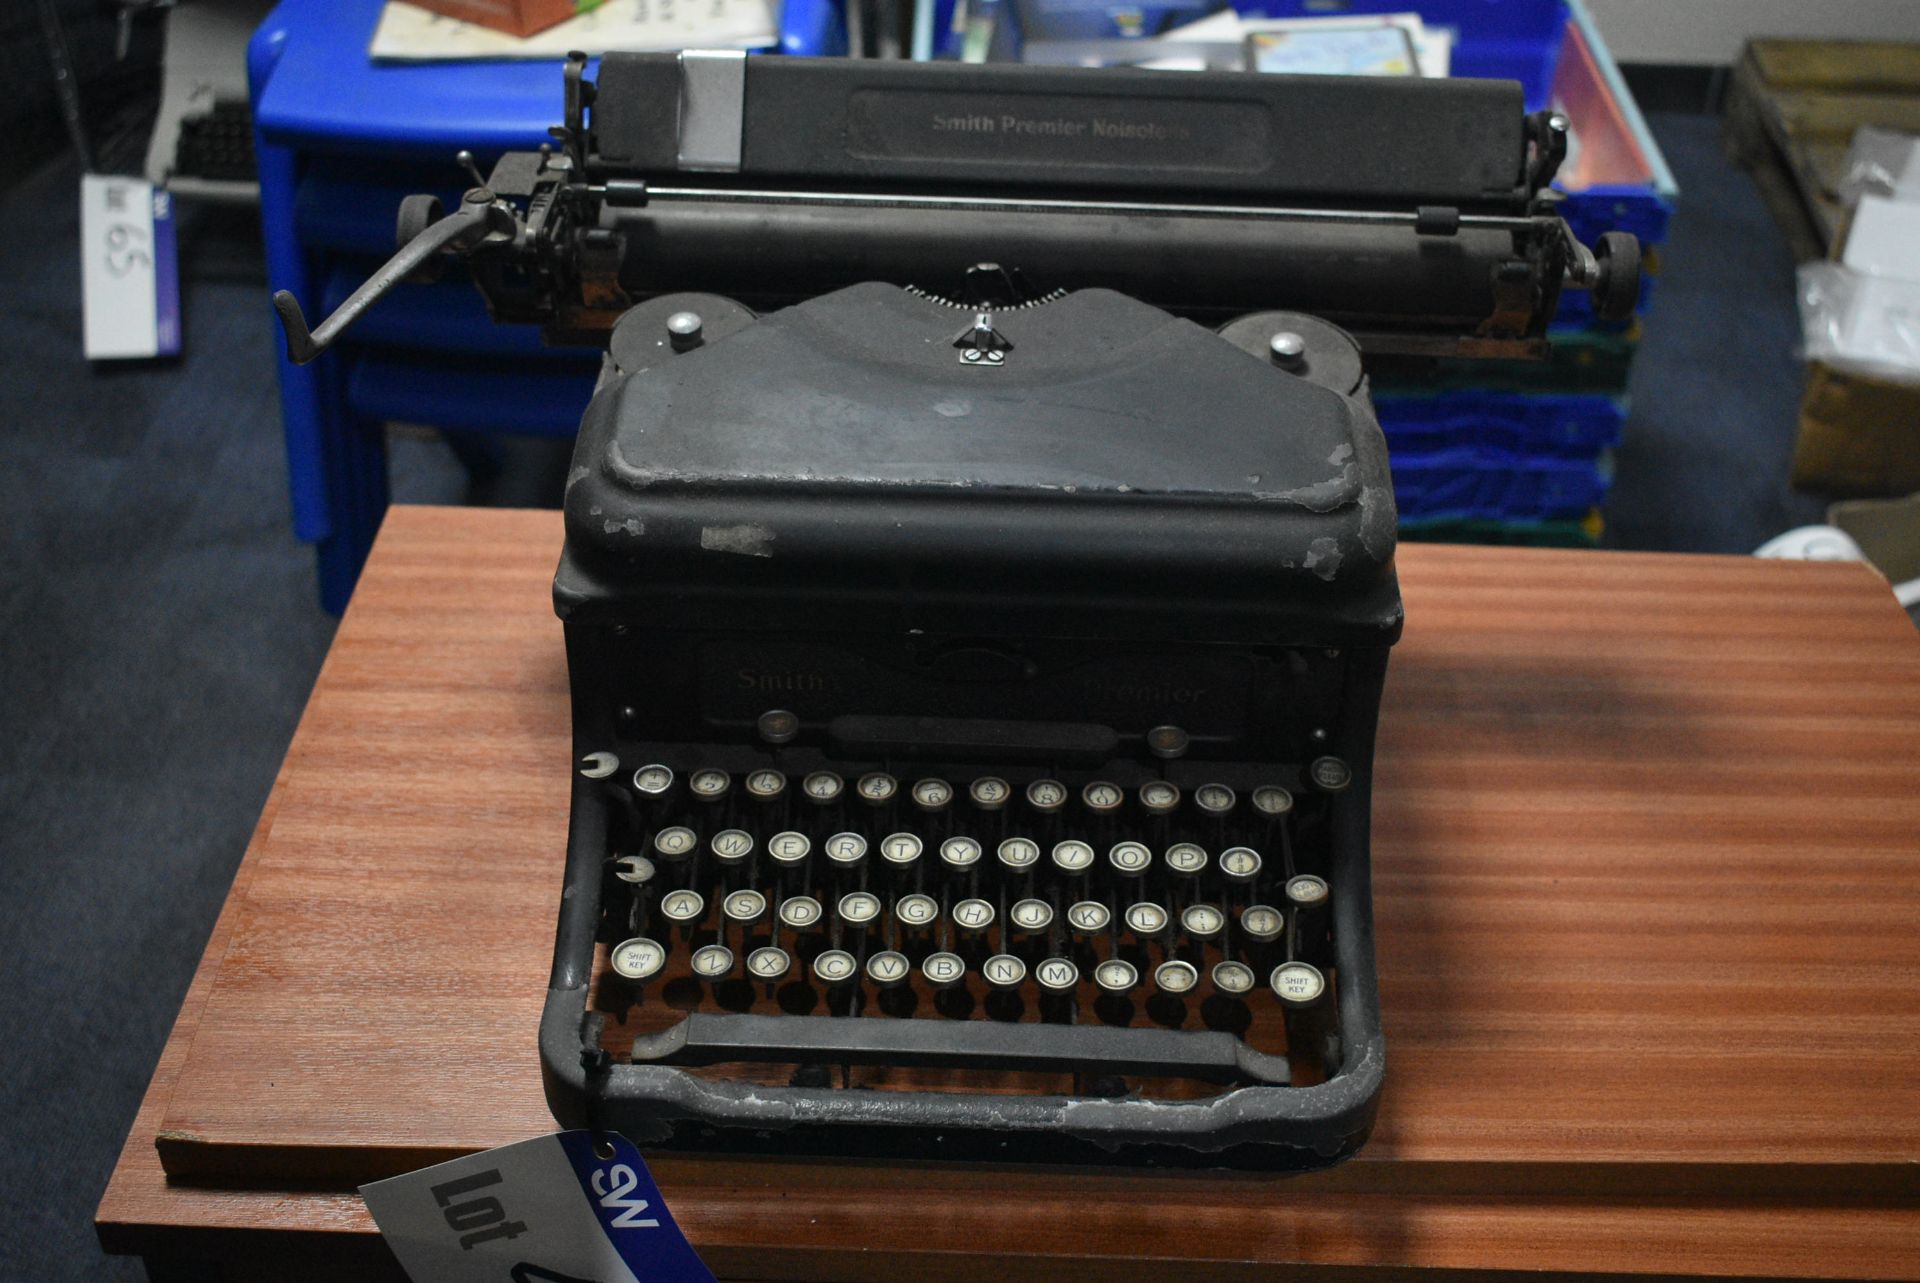 Smith Premier Noiseless Typewriter (note this lot